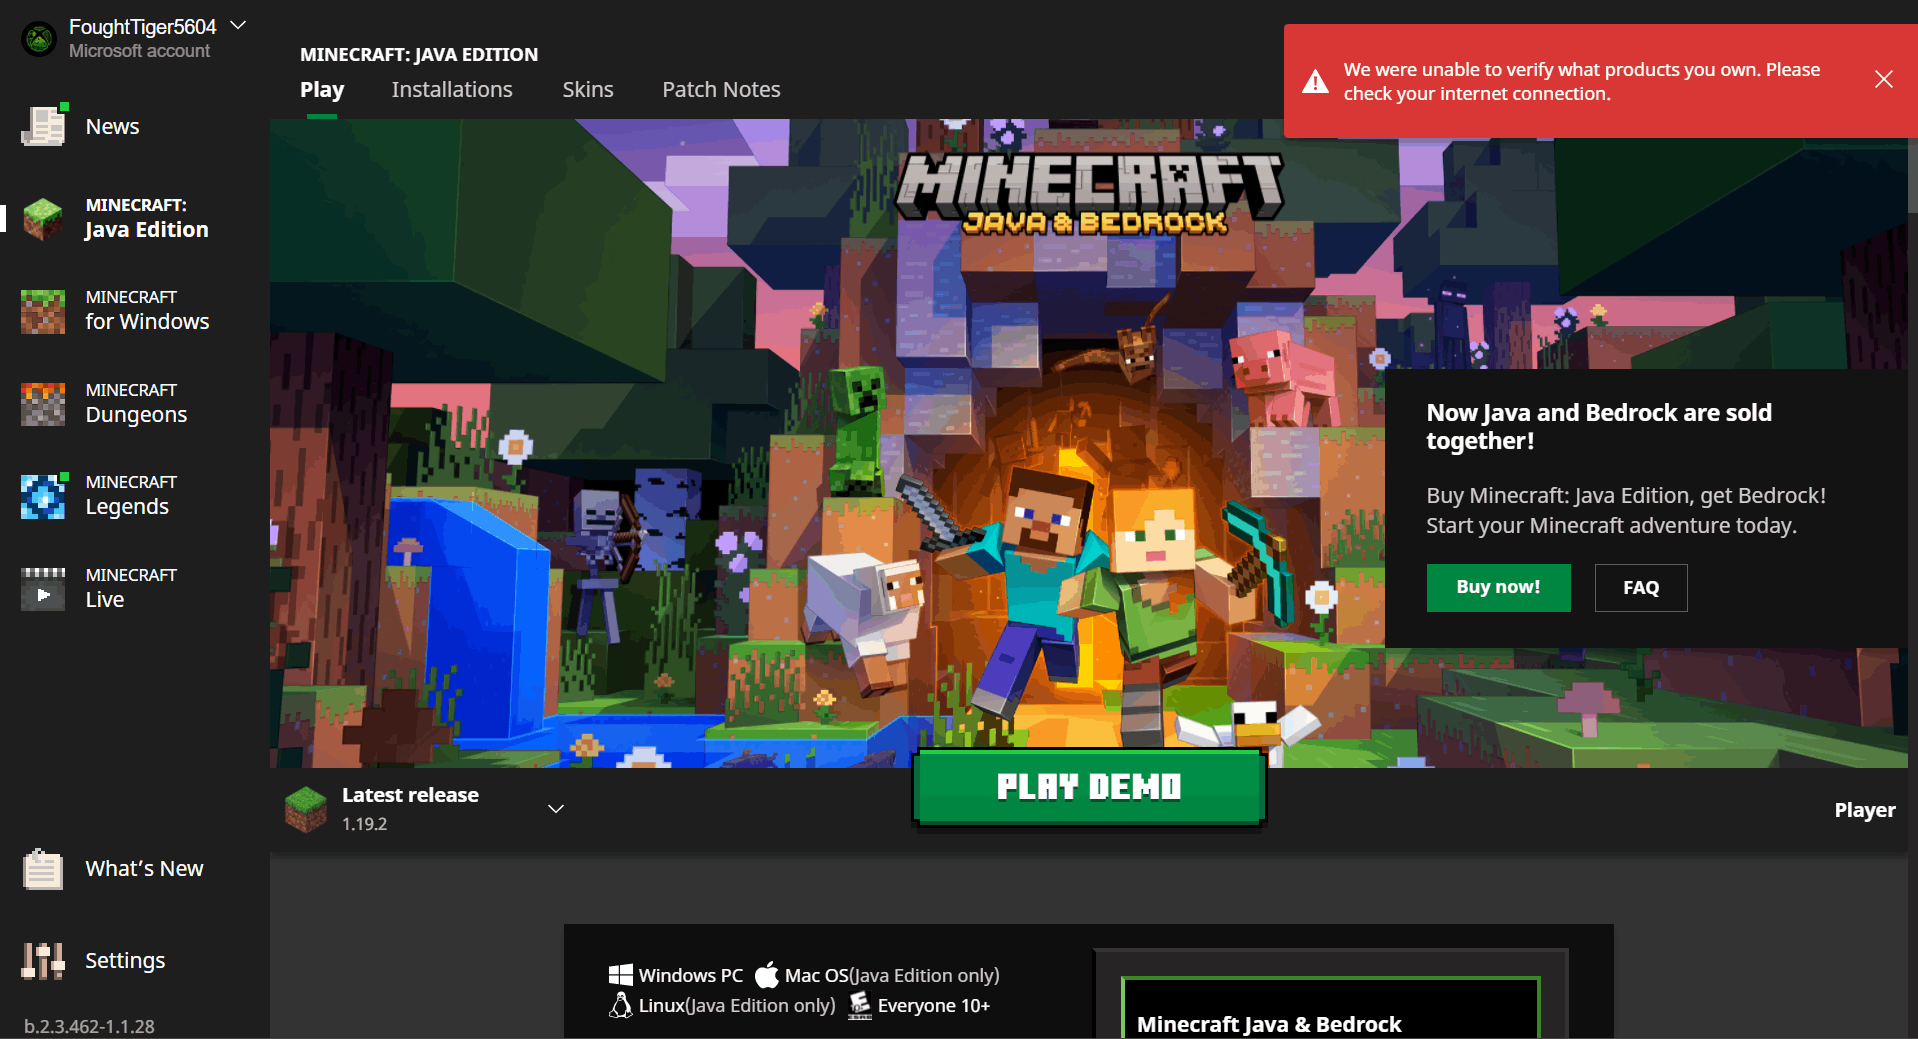 I cant download minecraft, its saying i own the app already or that i need  to update it when i dont even have minecraft on this phone the image shown  below is